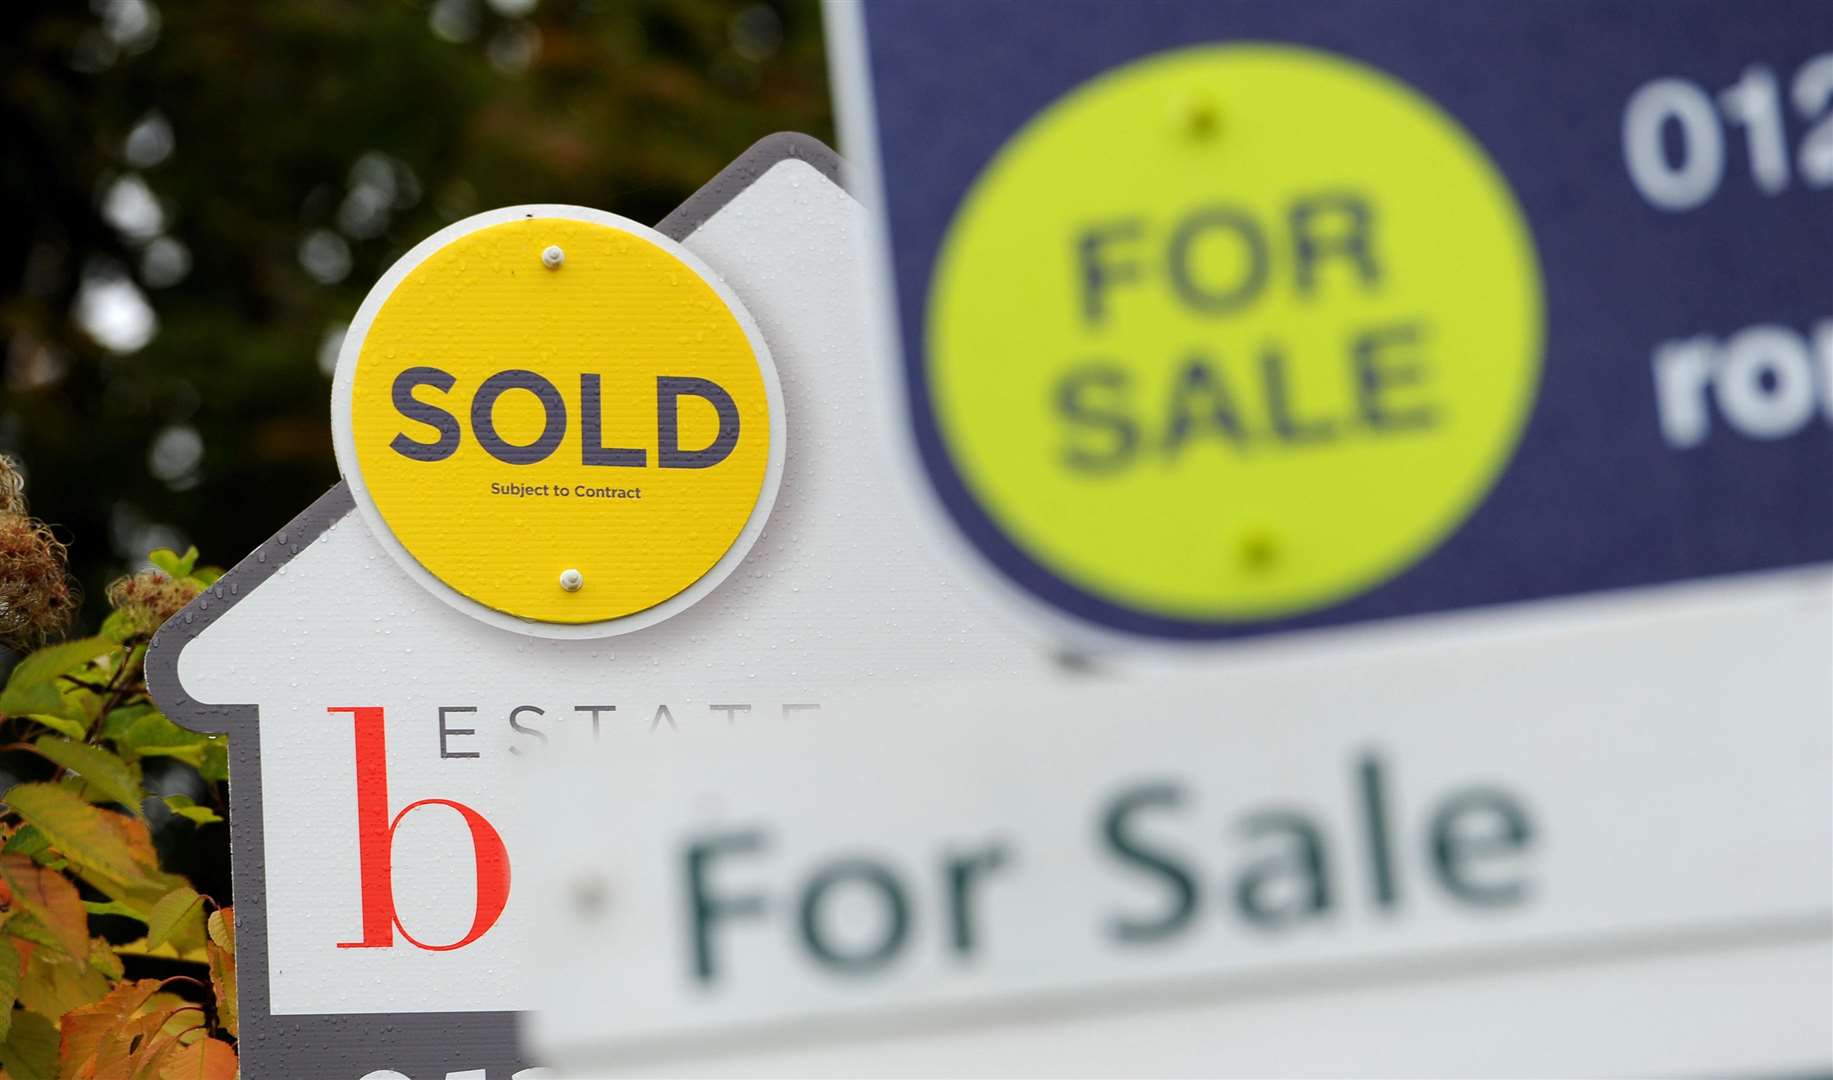 House prices have actually increased in Kent, up 4% in September compared to last year